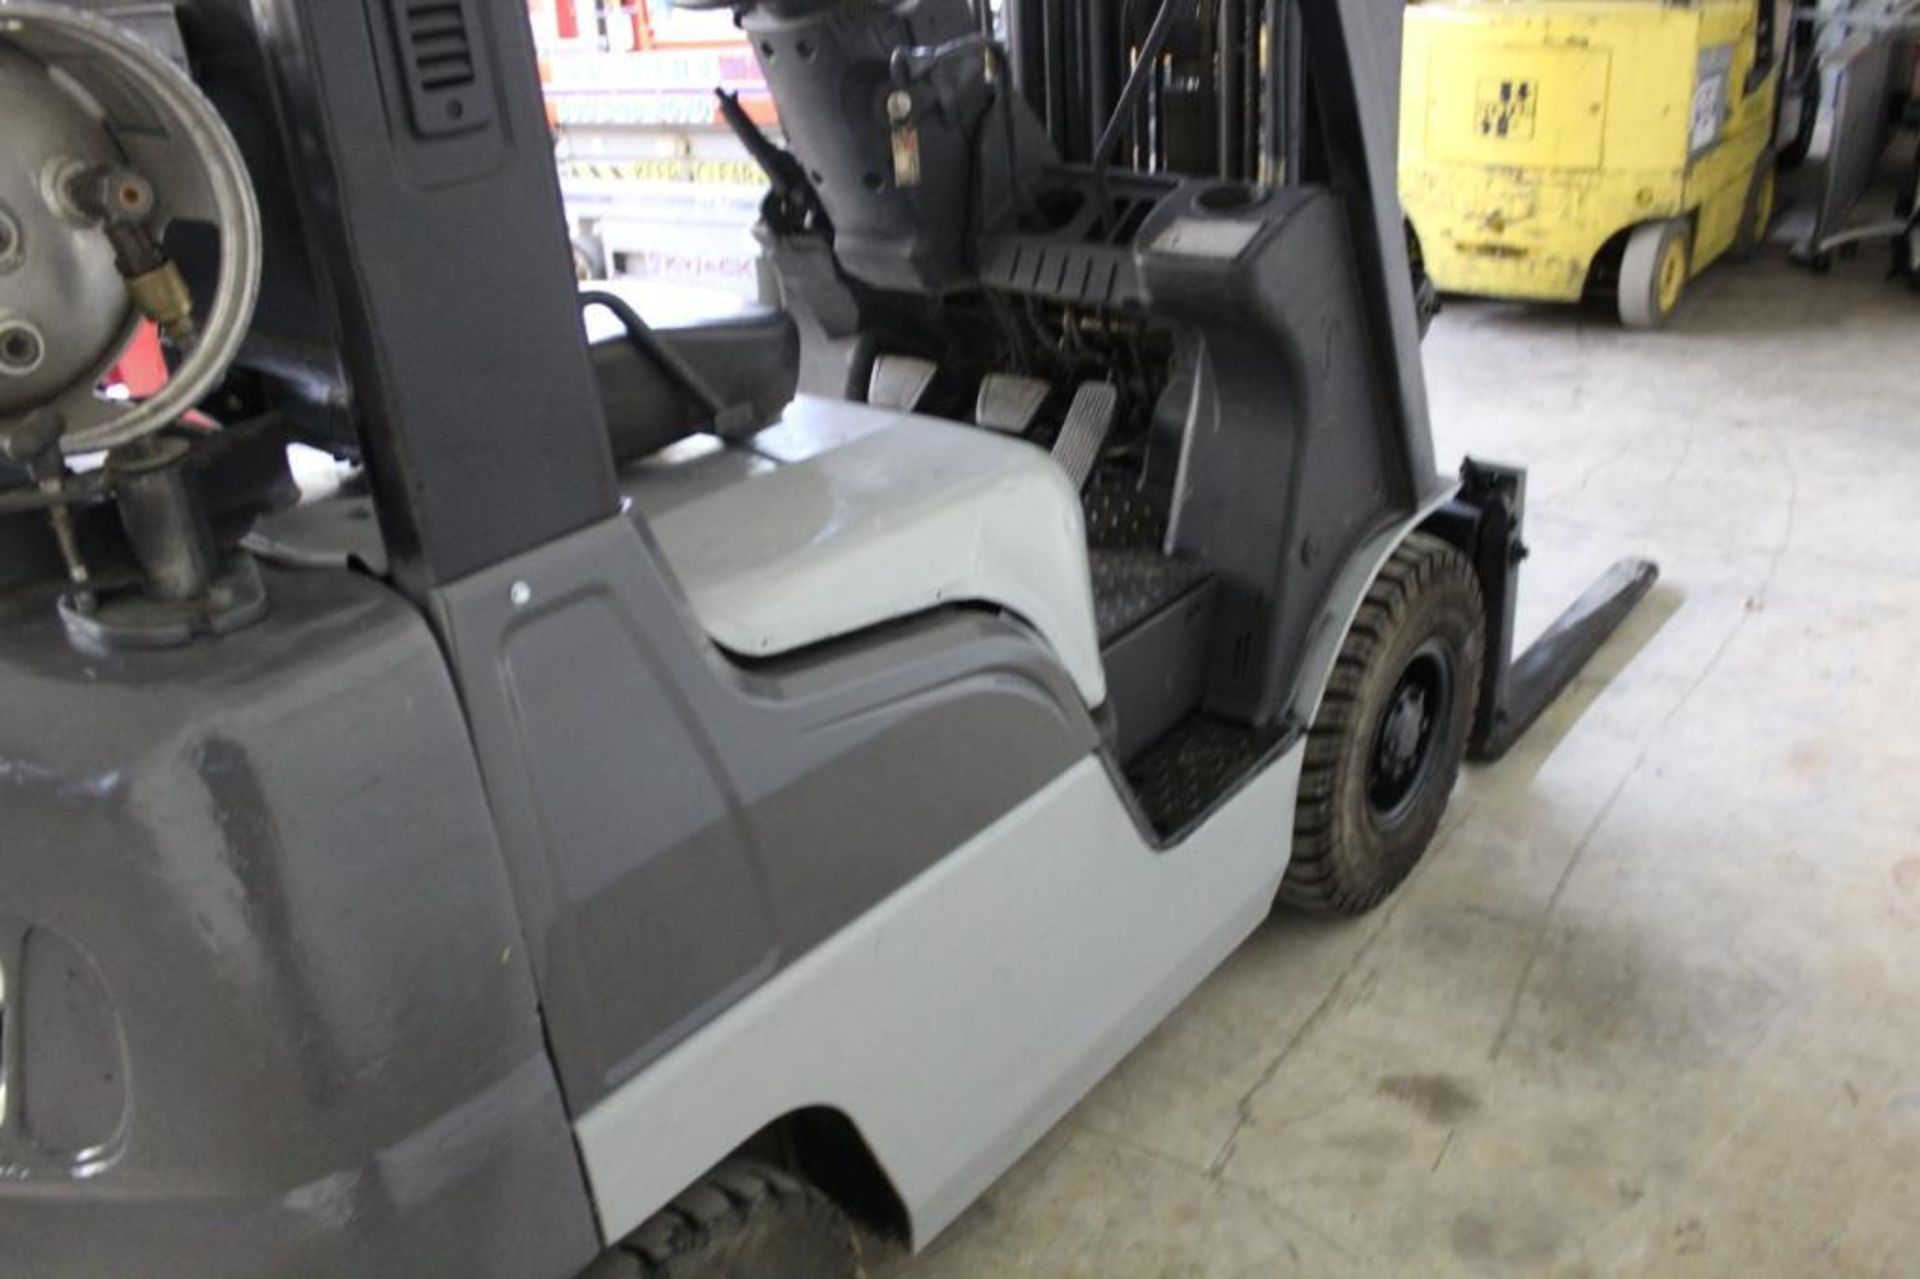 Nissan MPL01A15LV 2500 lb. pneumatic tire fork truck - Image 4 of 13